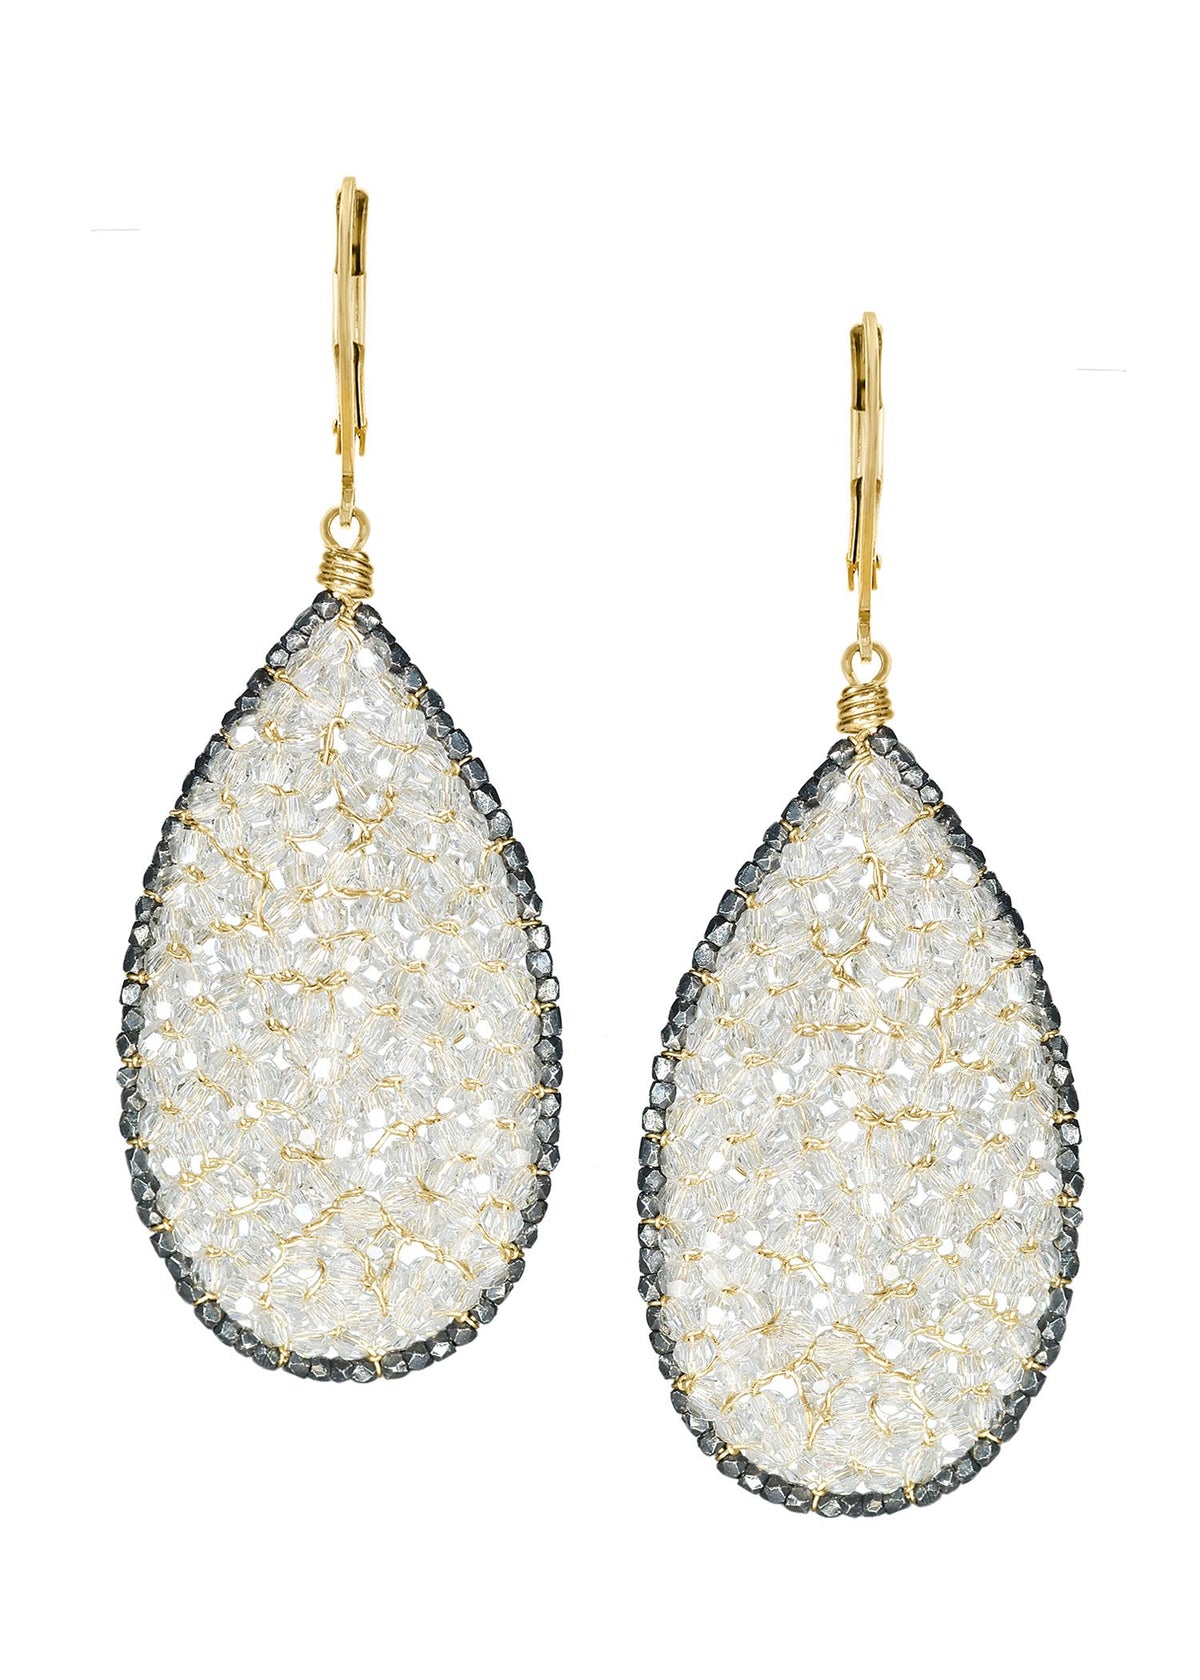 Crystal 14k gold fill Blackened sterling silver Mixed metal Earrings measure 2-3/16&quot; in length (including the levers) and 3/4&quot; in width Handmade in our Los Angeles studio